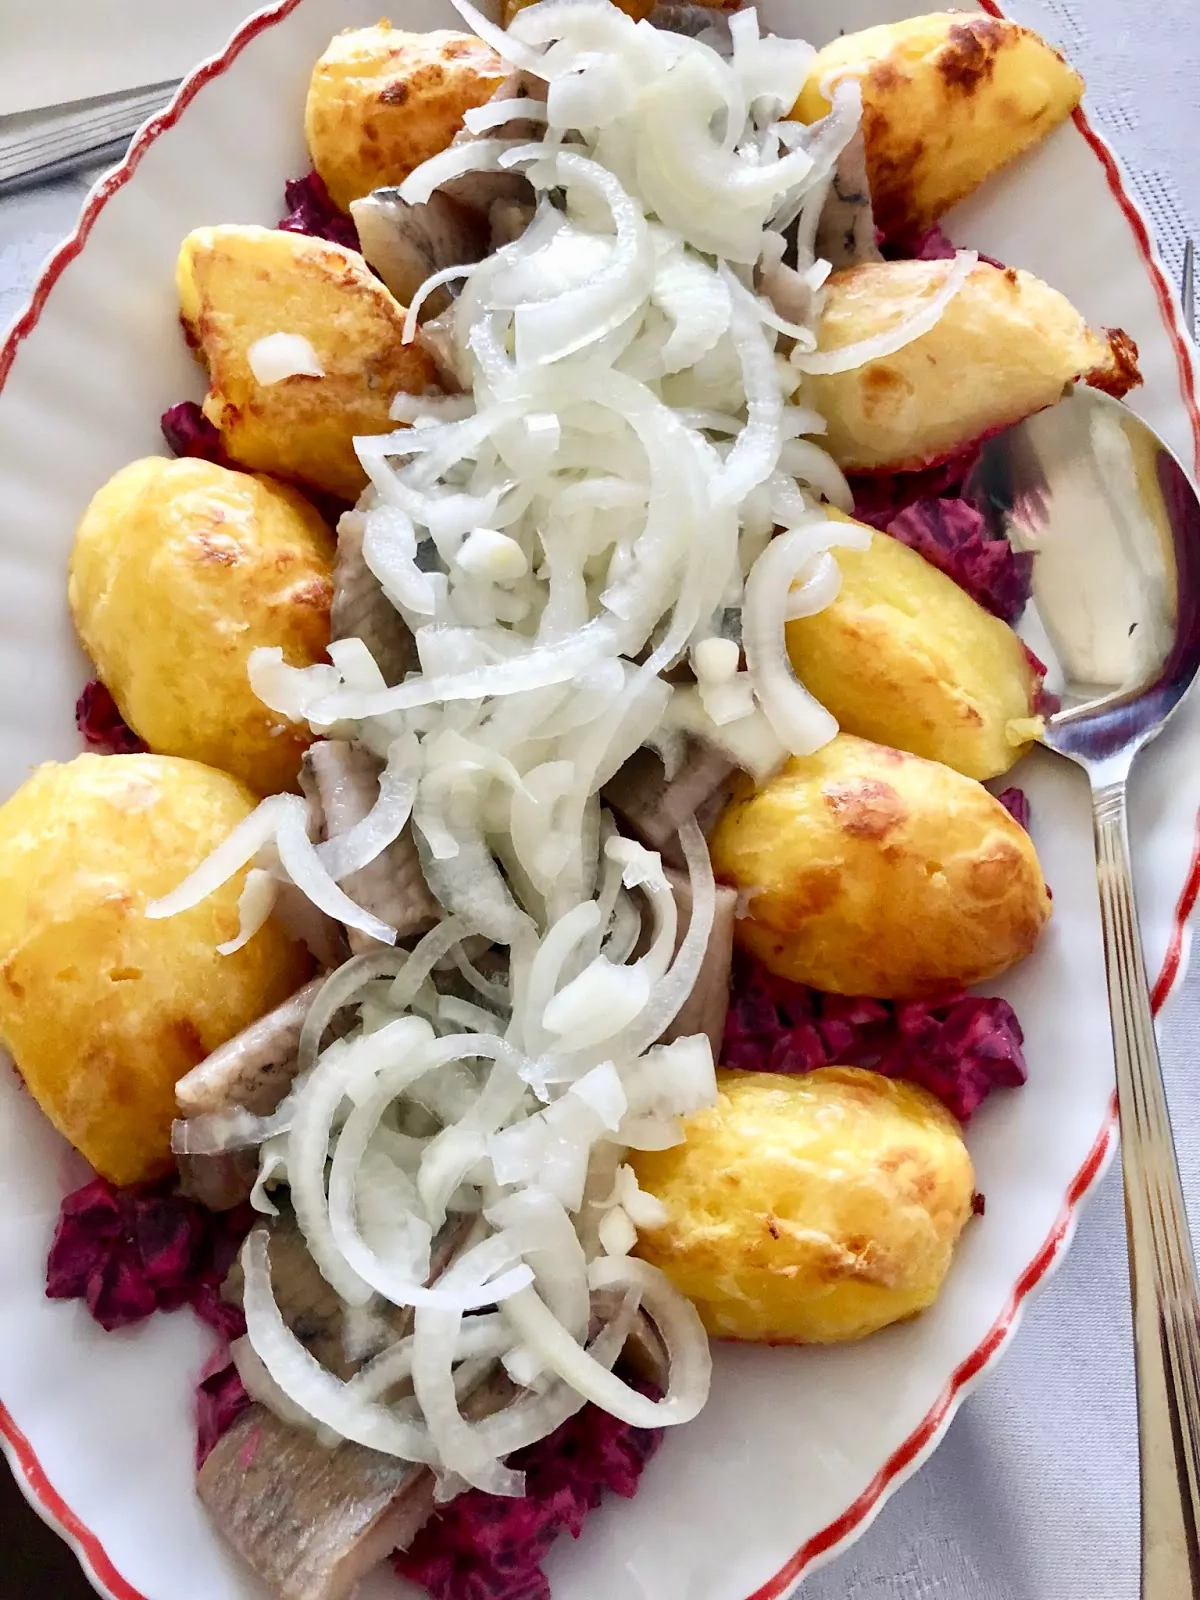 Dutch matjes herring with beetroot, apples and potatoes